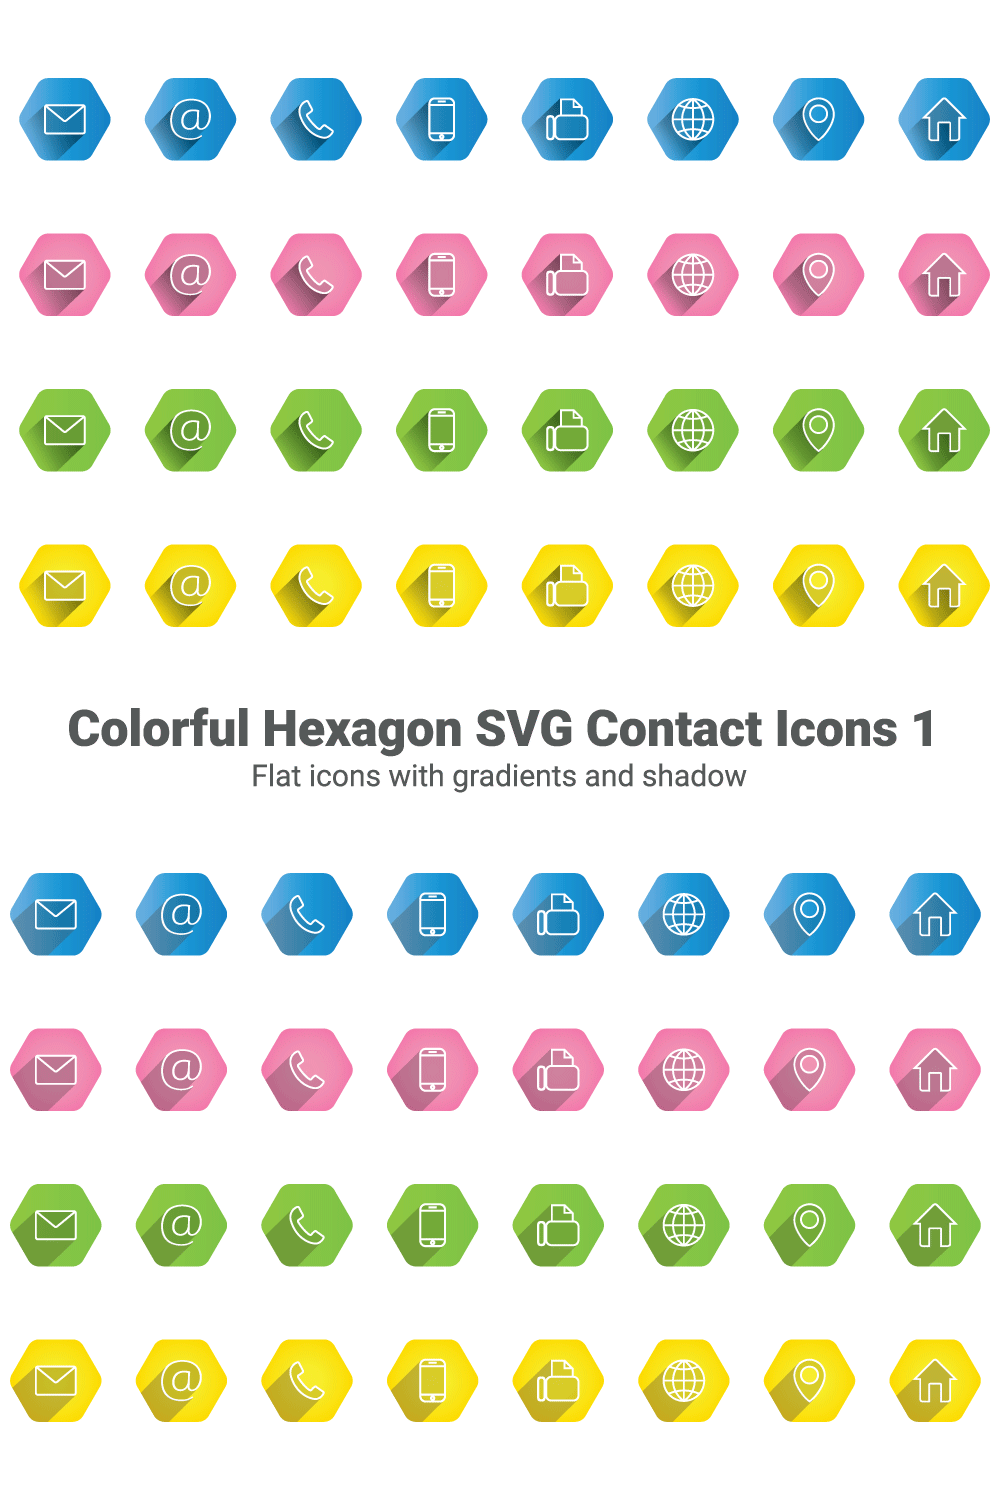 Colorful hexagon SVG contact icons 1 pinterest preview image.